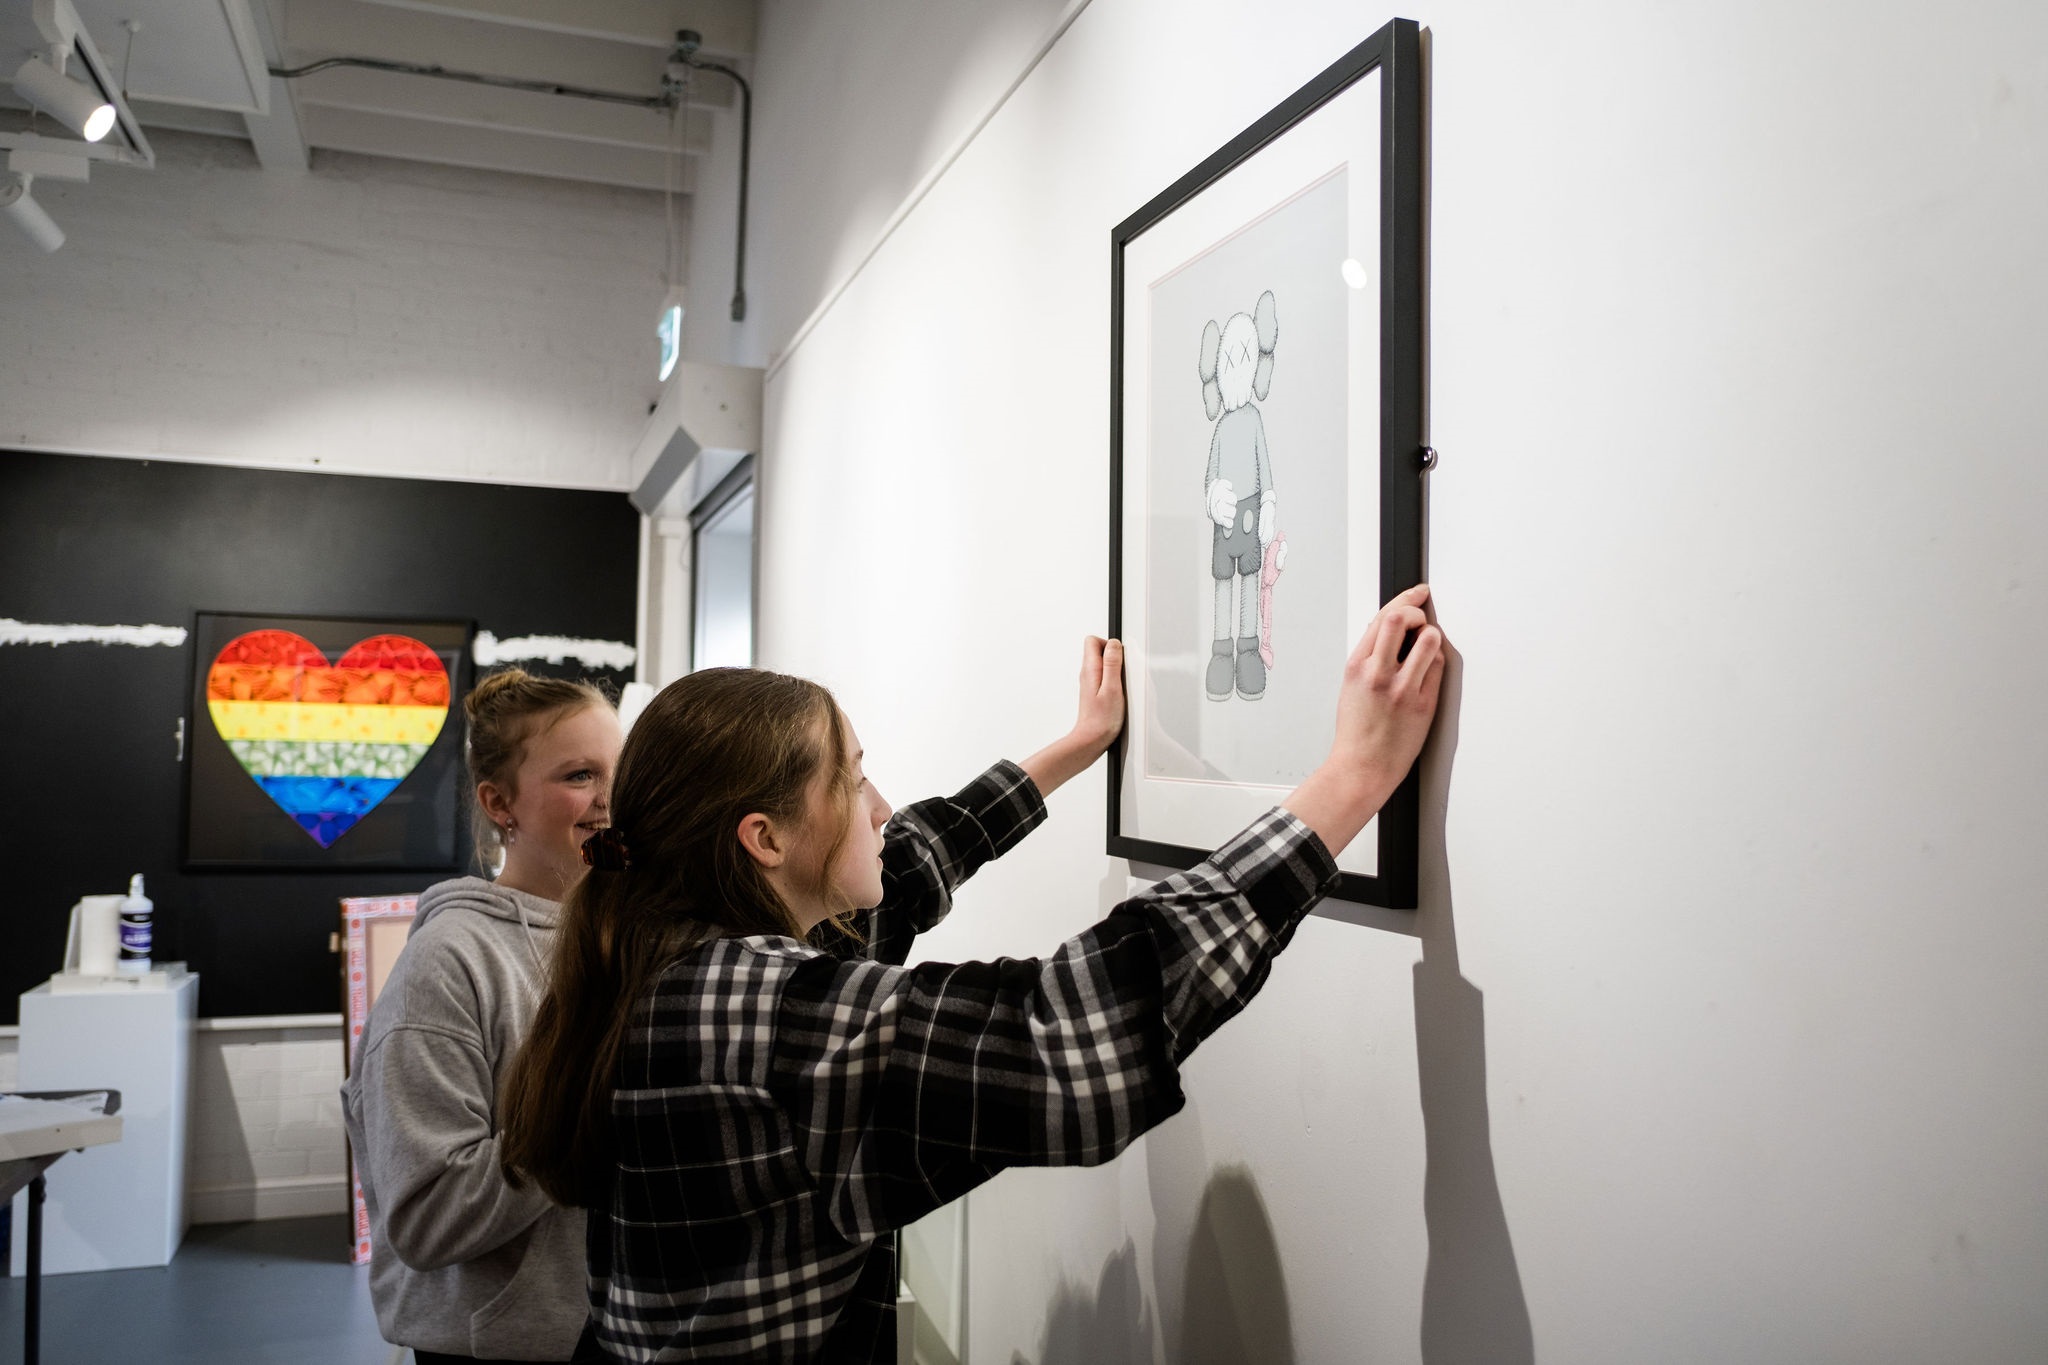 The image shows pupils preparing an exhibition of images.